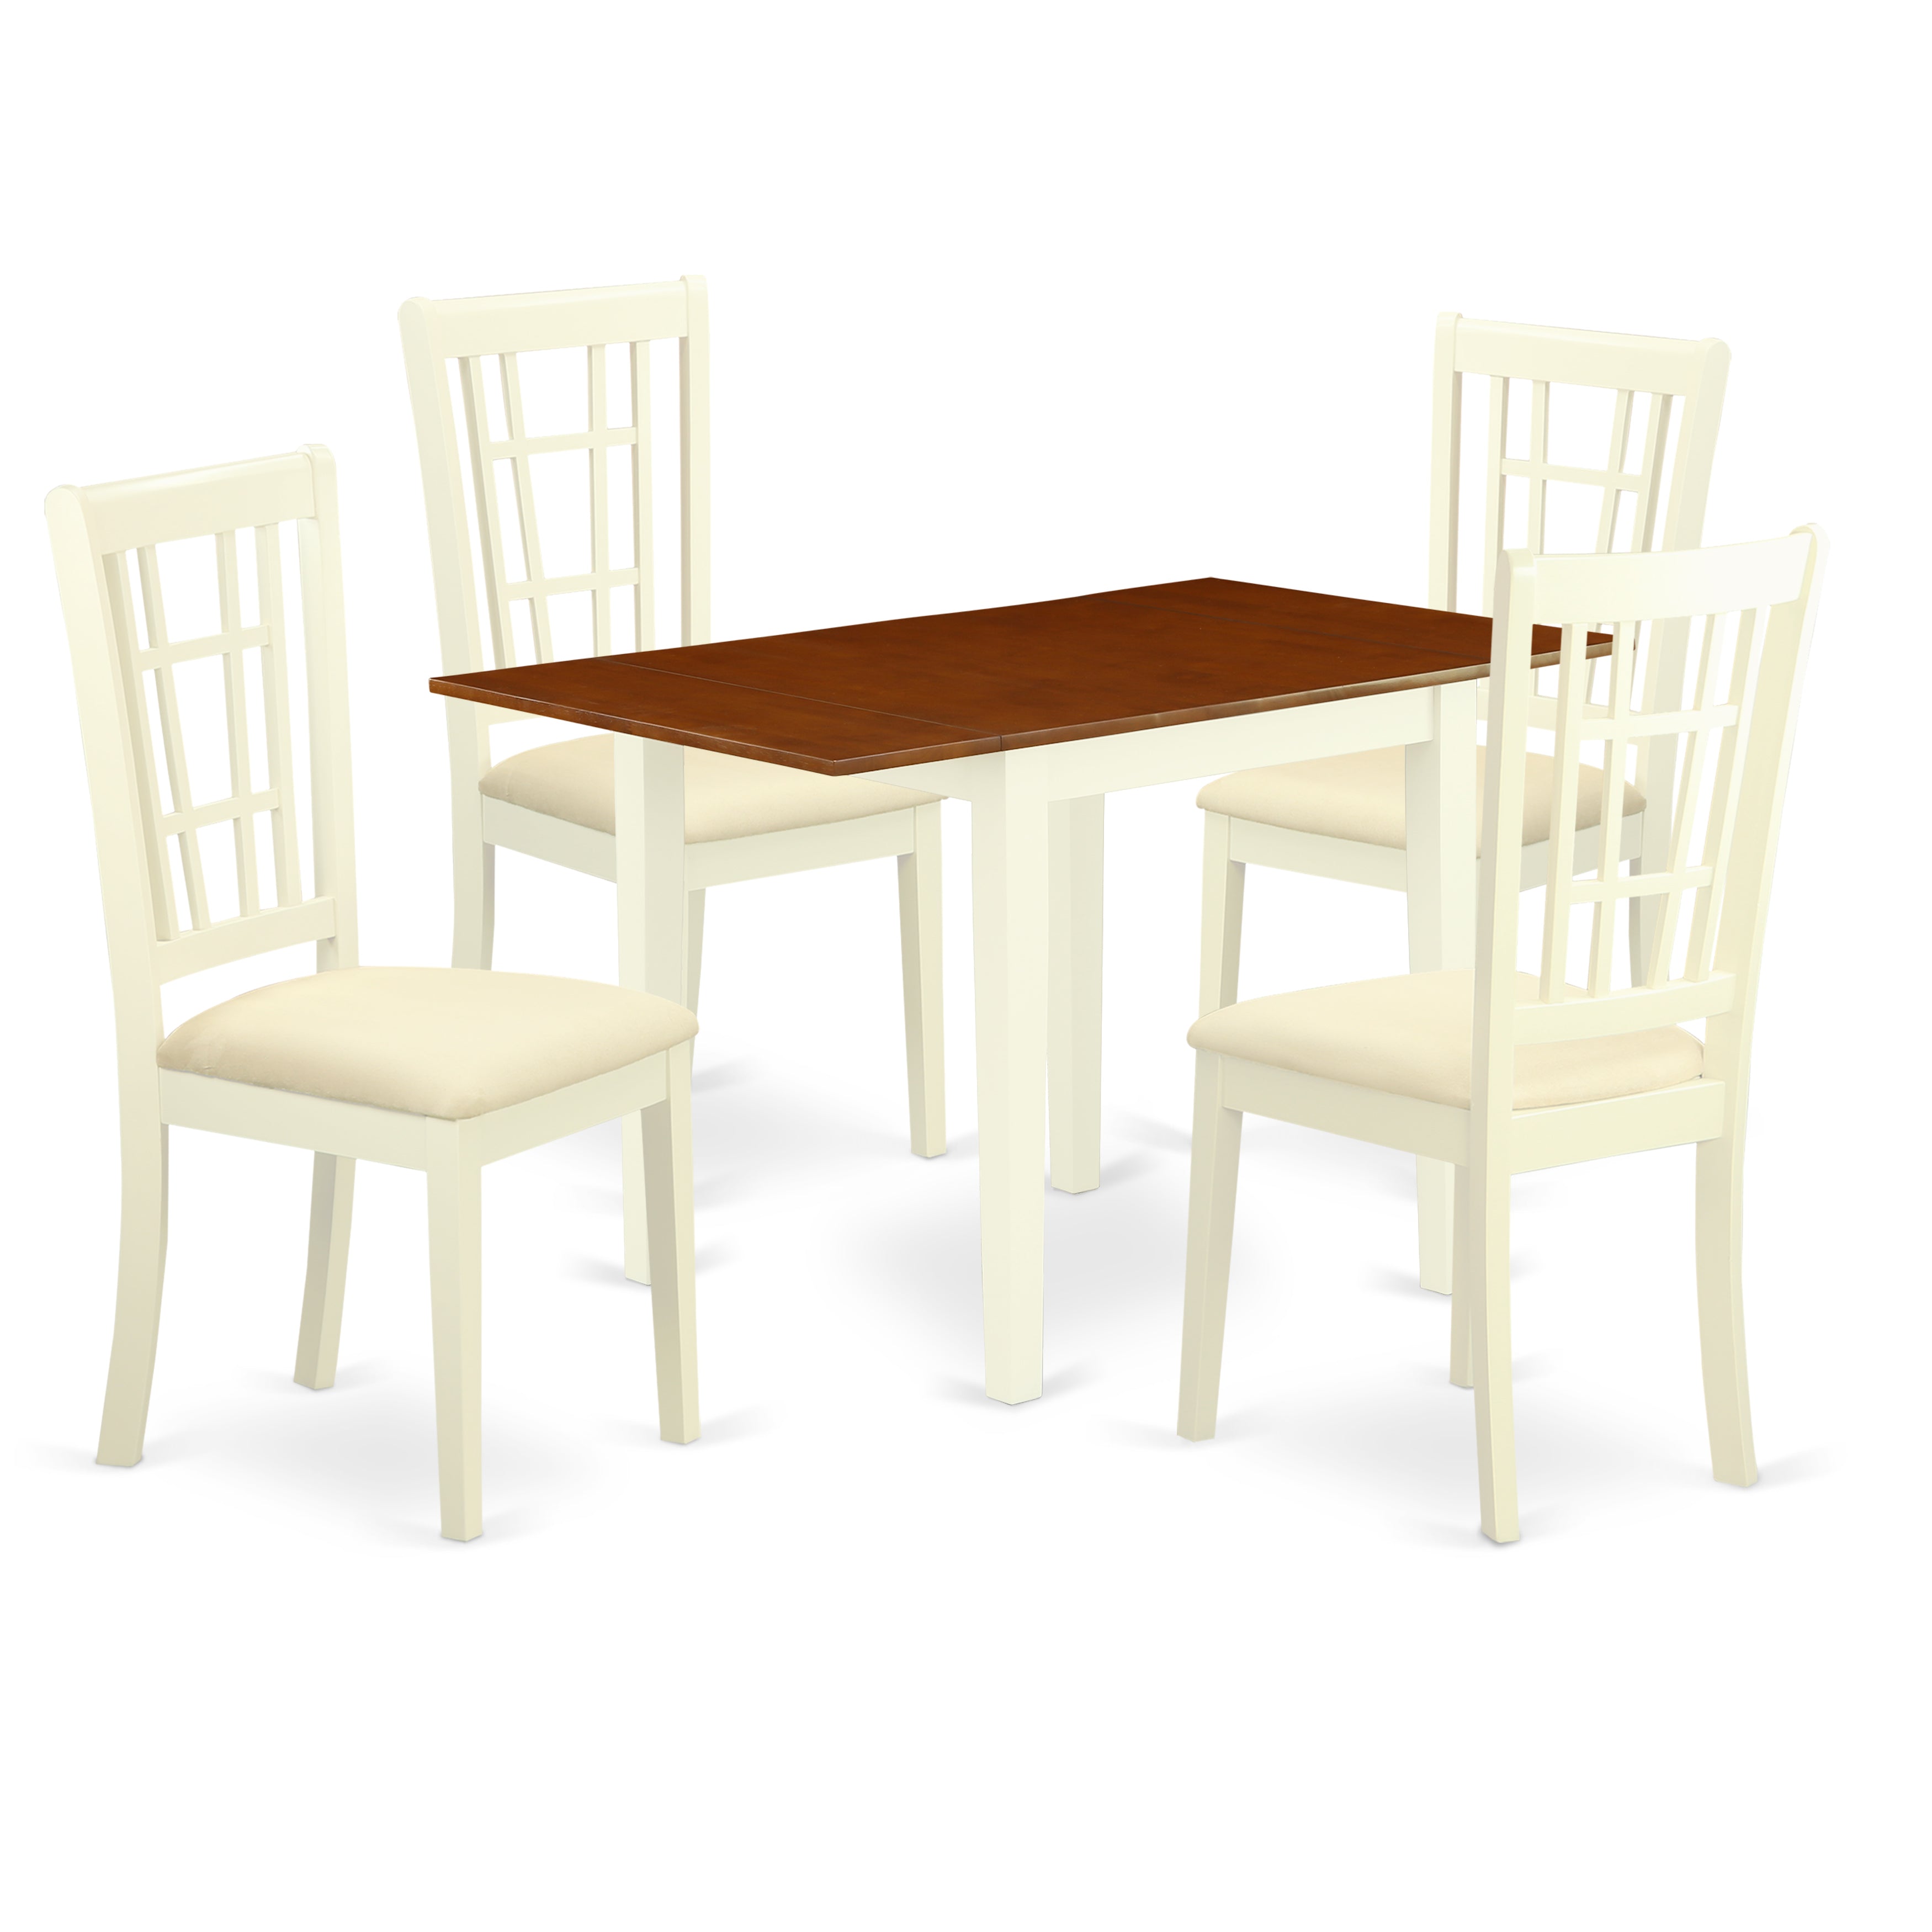 East West Furniture NDNI5-WHI-C 5Pc Dining Room Table Set Features a Modern Dining Table and 4 Wooden Dining Chairs with Microfiber Upholstery Seat, Buttermilk and Cherry Finish